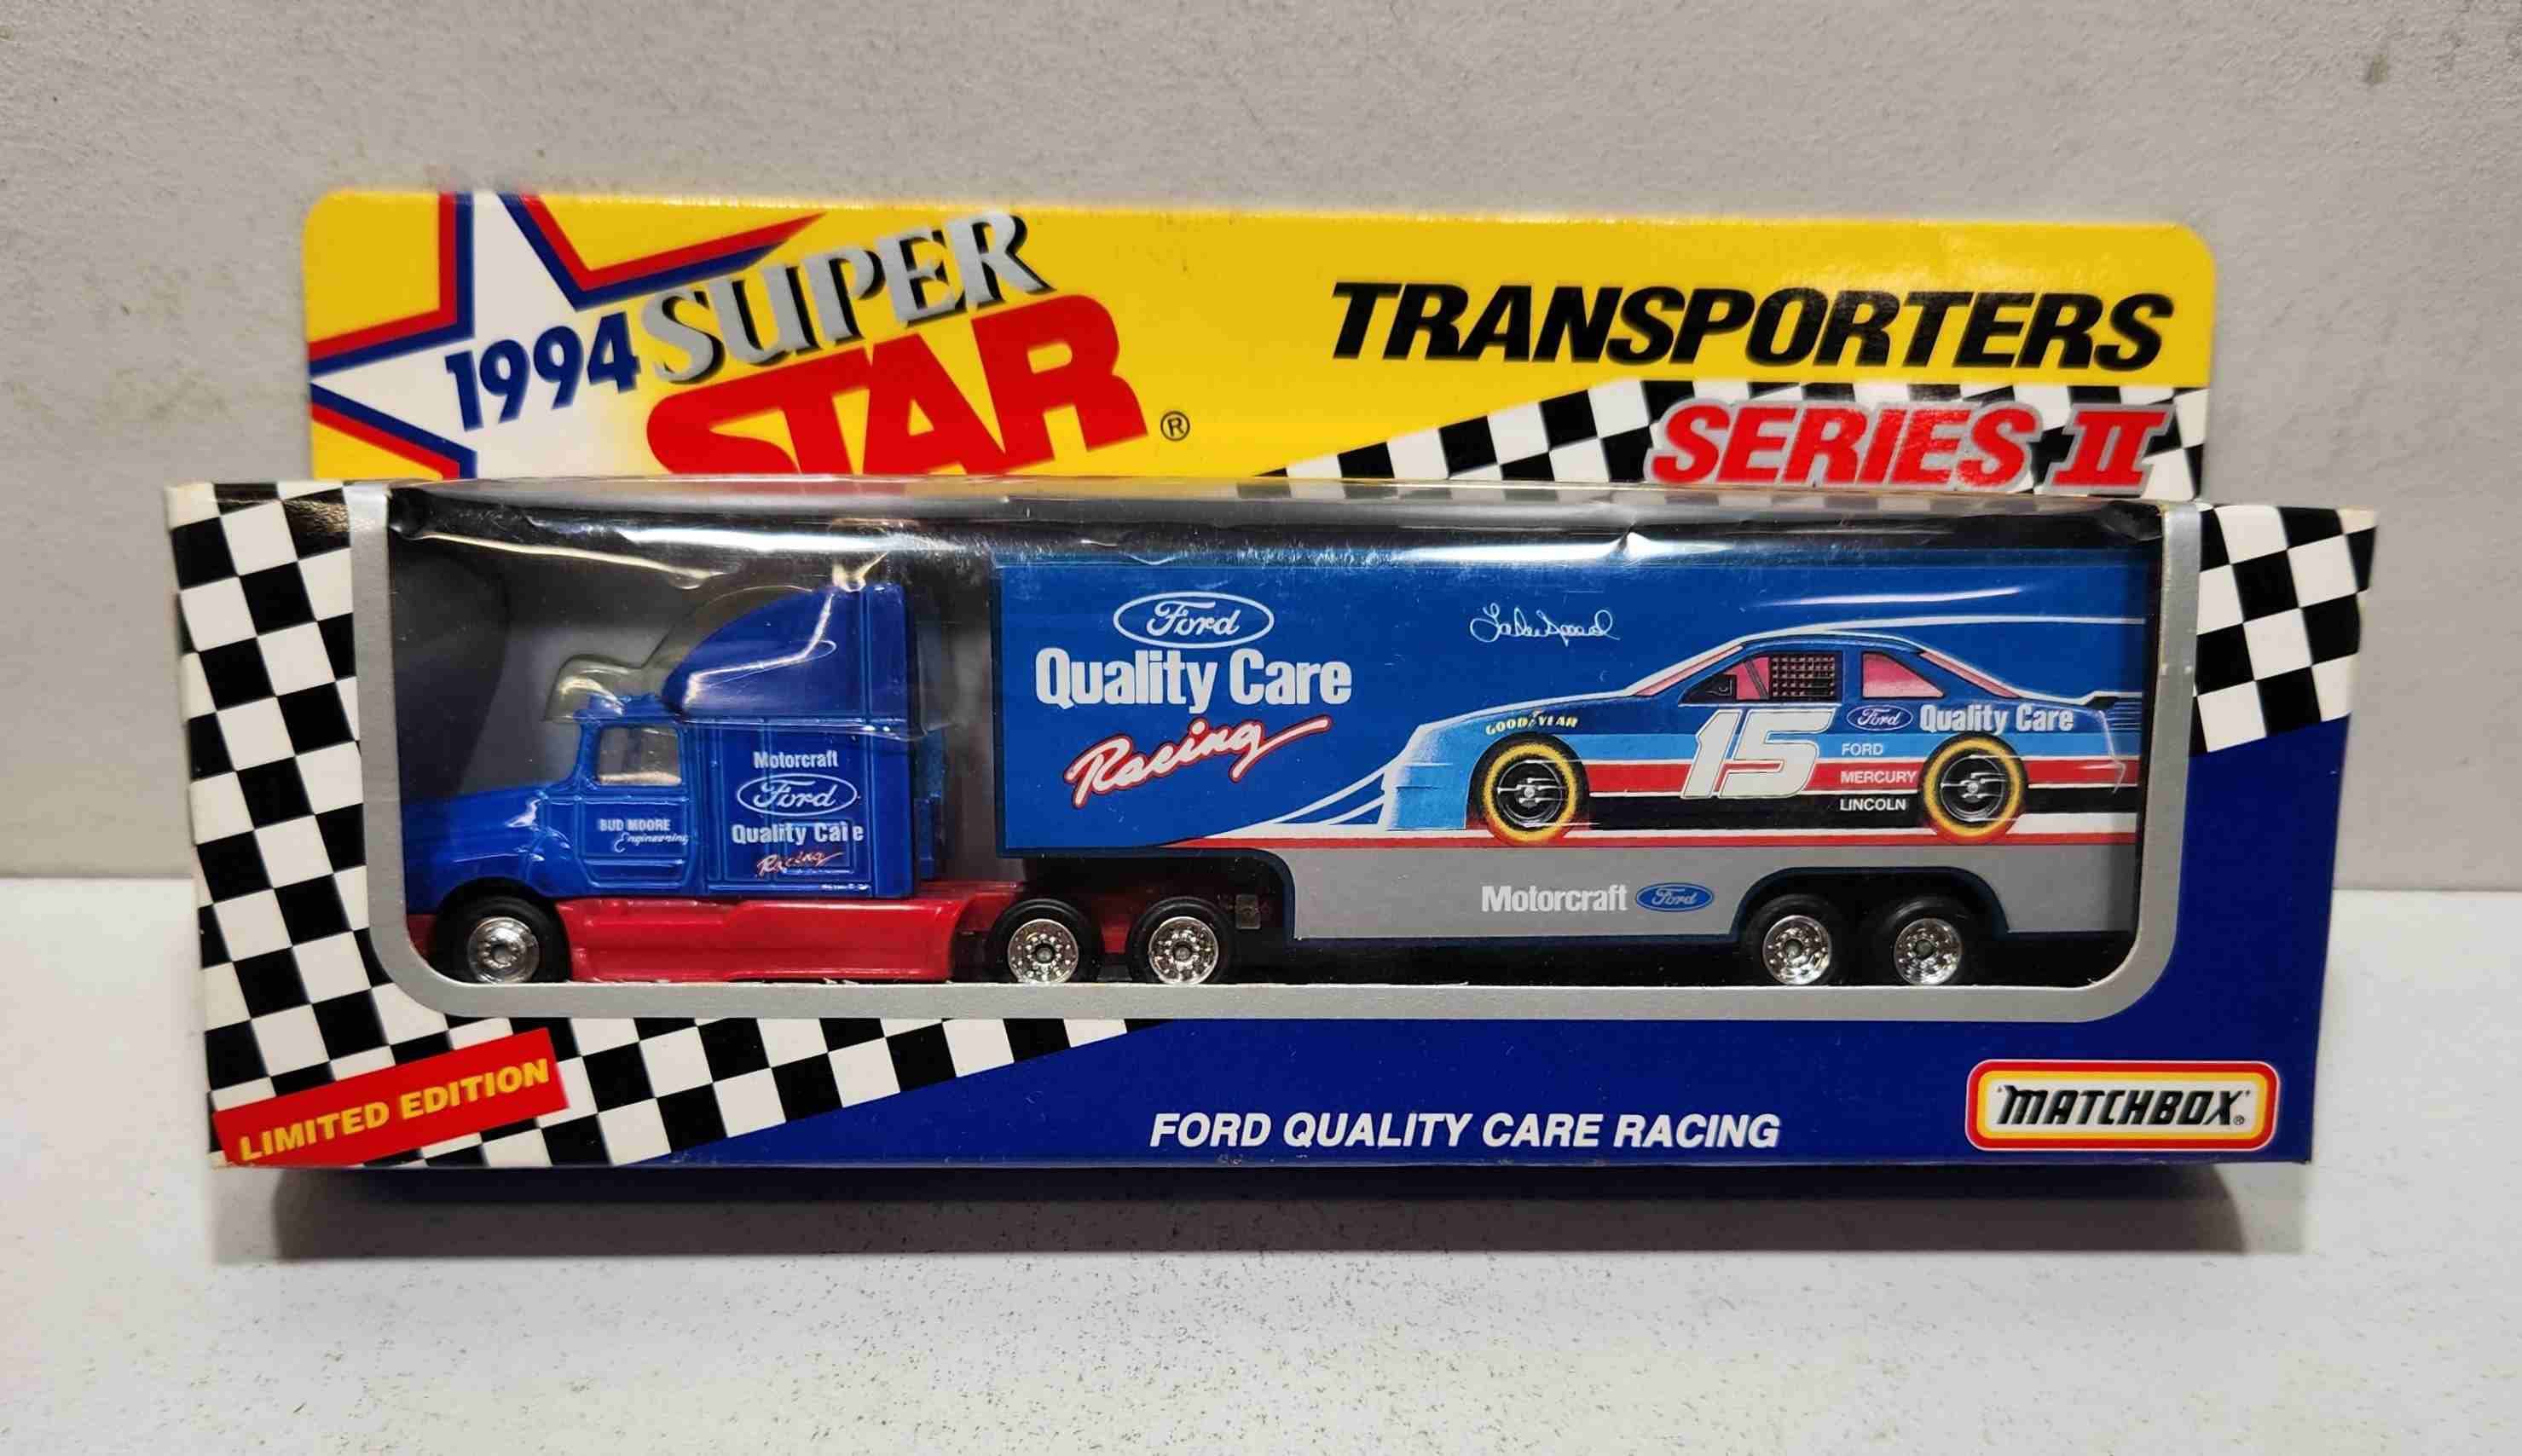 1994 Lake Speed 1/80th Ford Quality Care Transporter